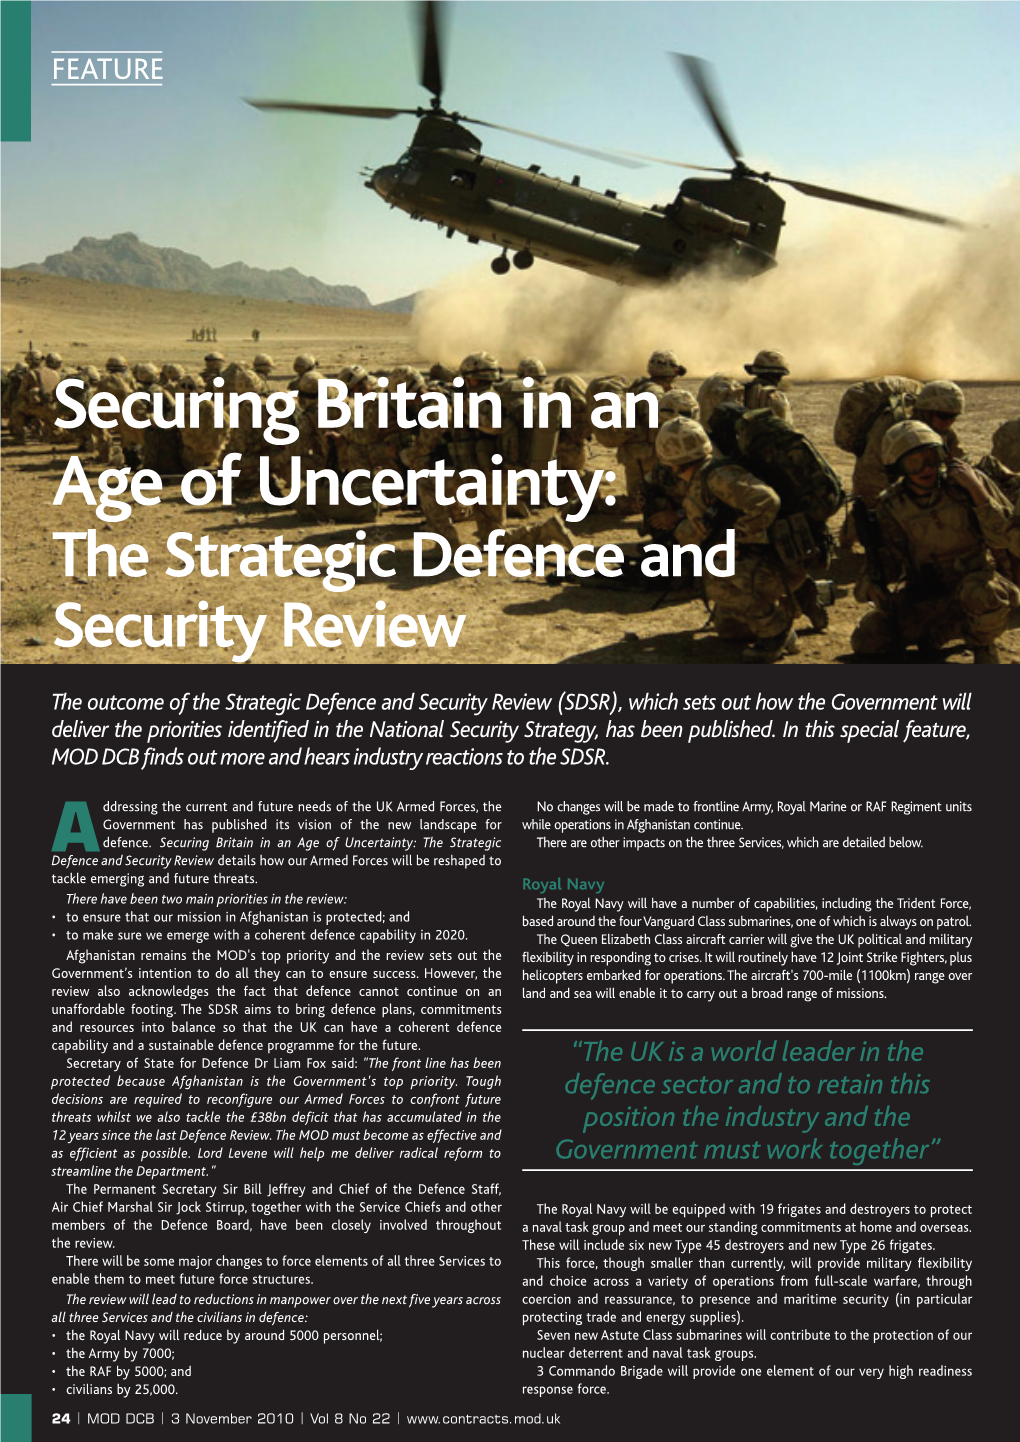 Securing Britain in an Age of Uncertainty: the Strategic Defence and Security Review